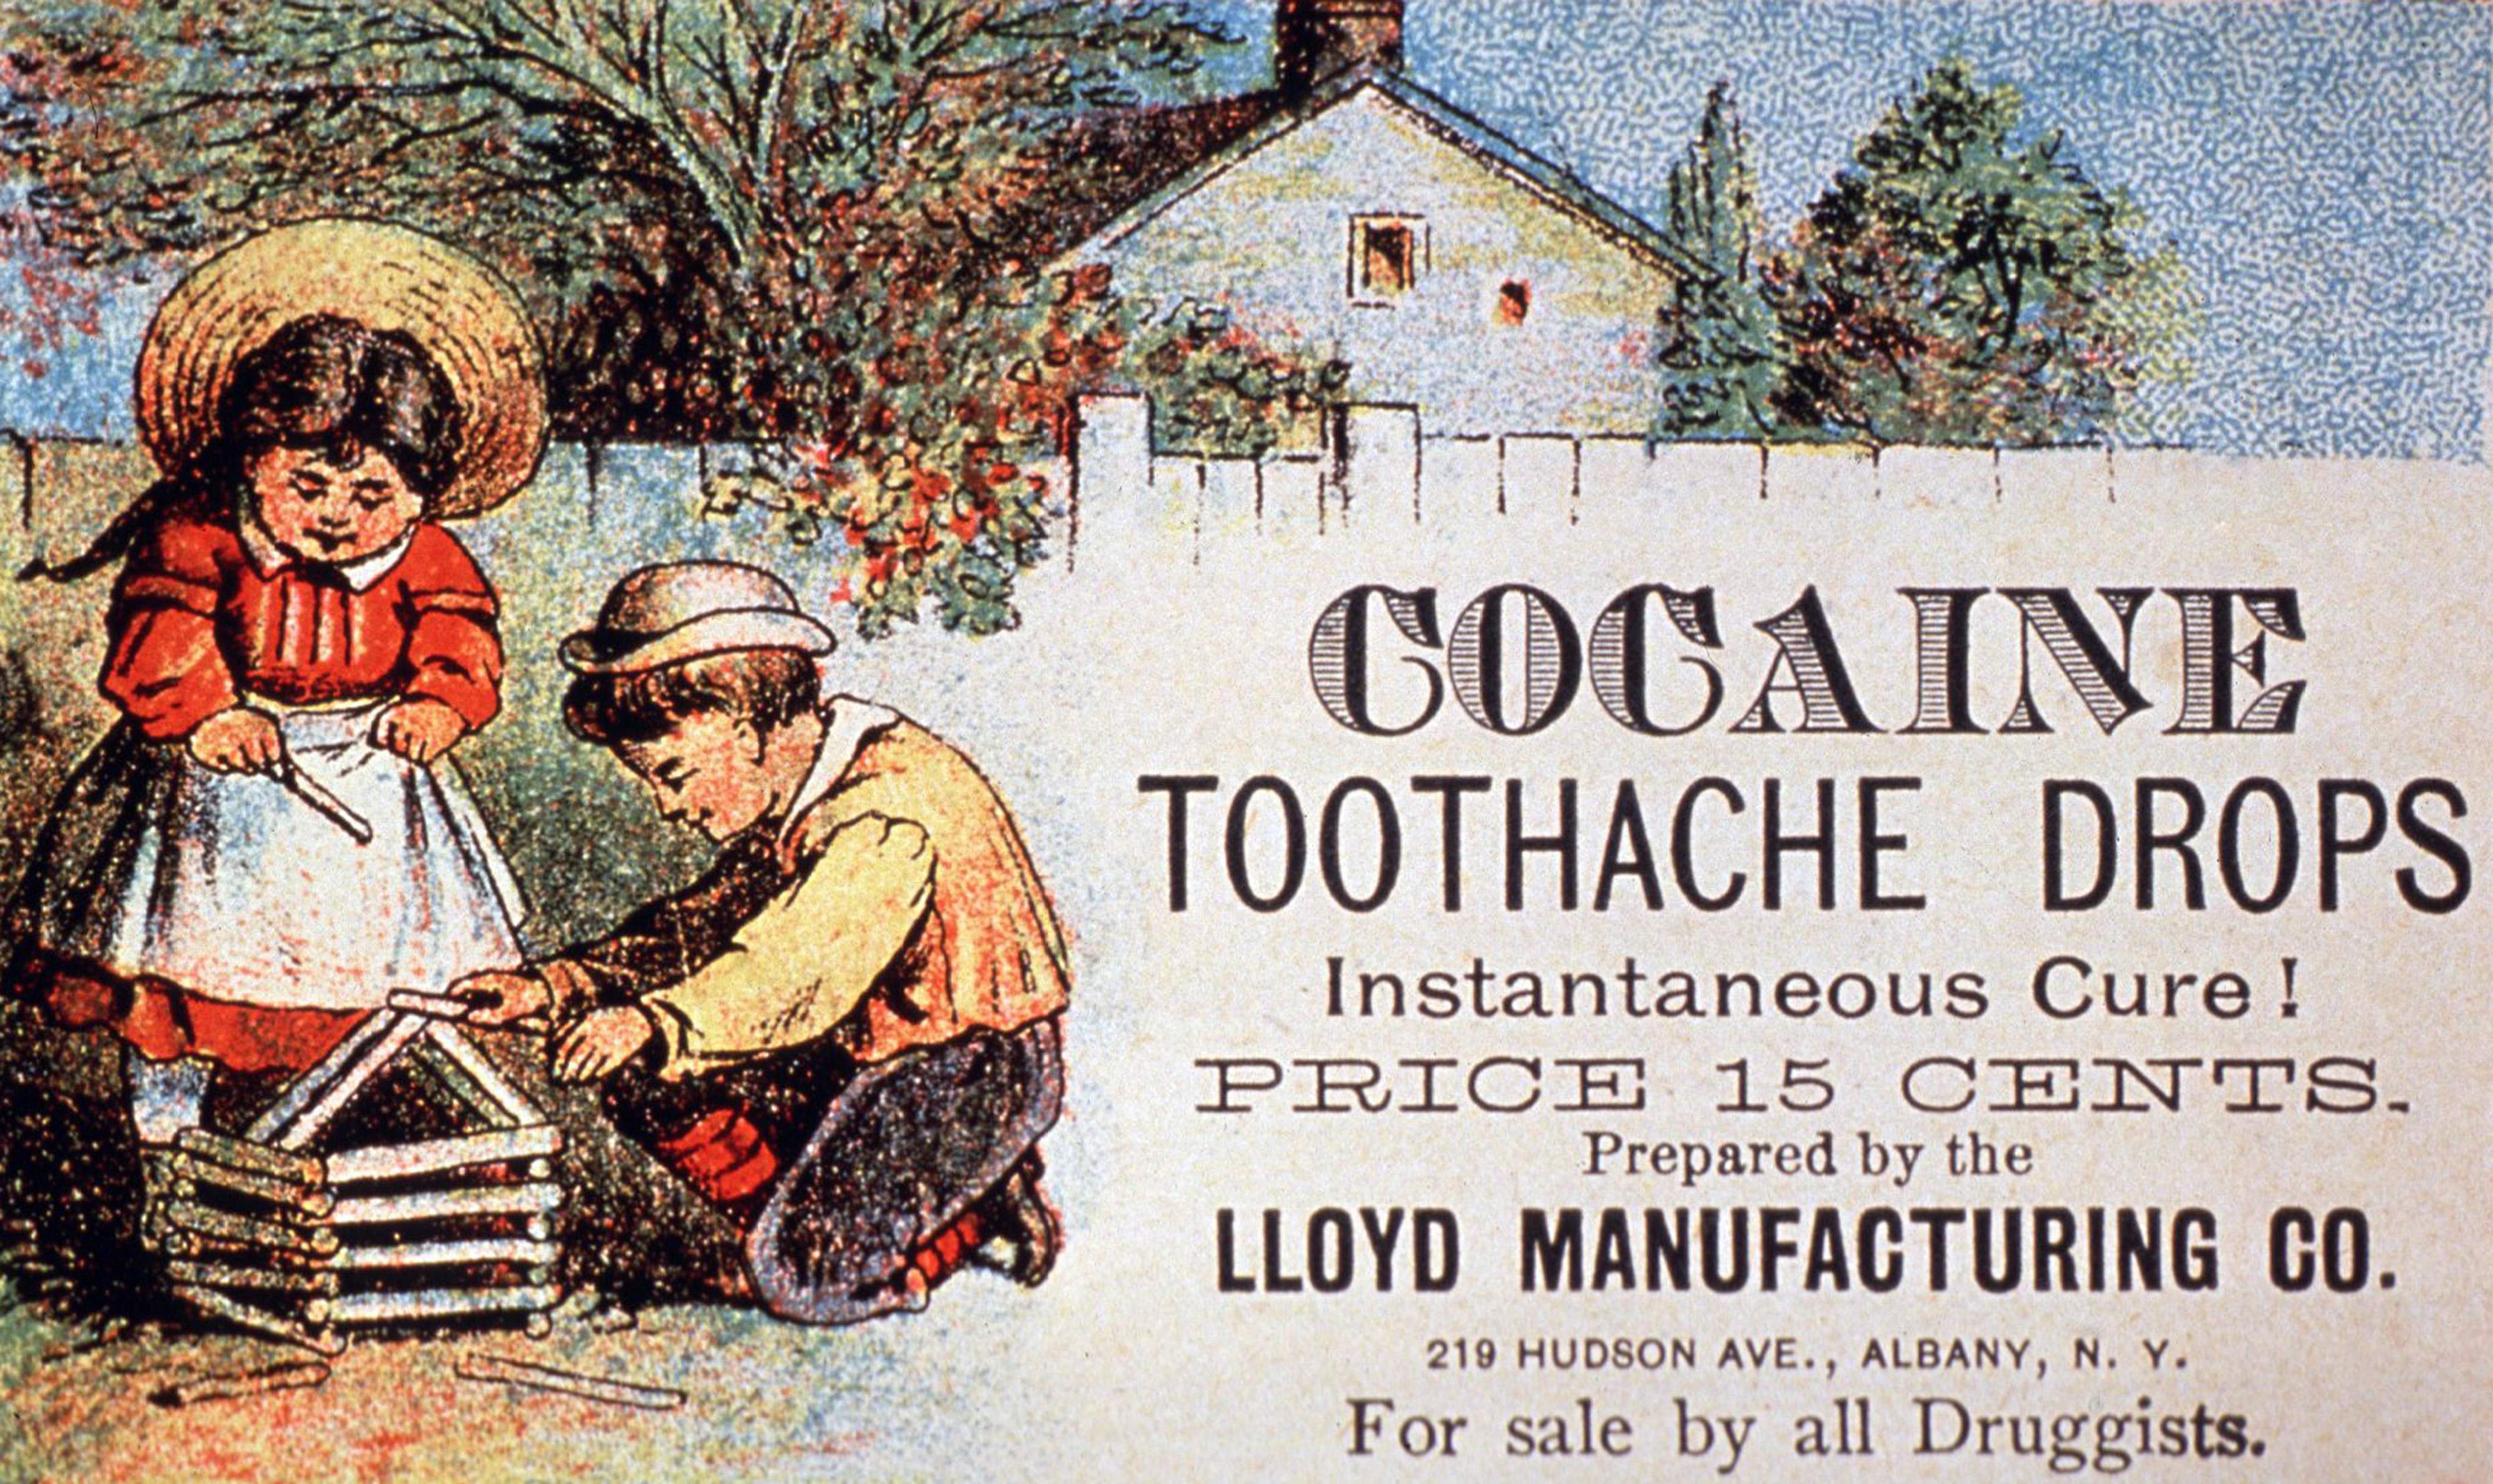 An ad with illustrations of two children playing that says, &quot;Cocaine toothache drops / Instantaneous Cure! / Price 15 cents / Prepared by the Lloyd Manufacturing Co 219 Hudson Ave, Albany NY / For sale by all Druggists&quot;